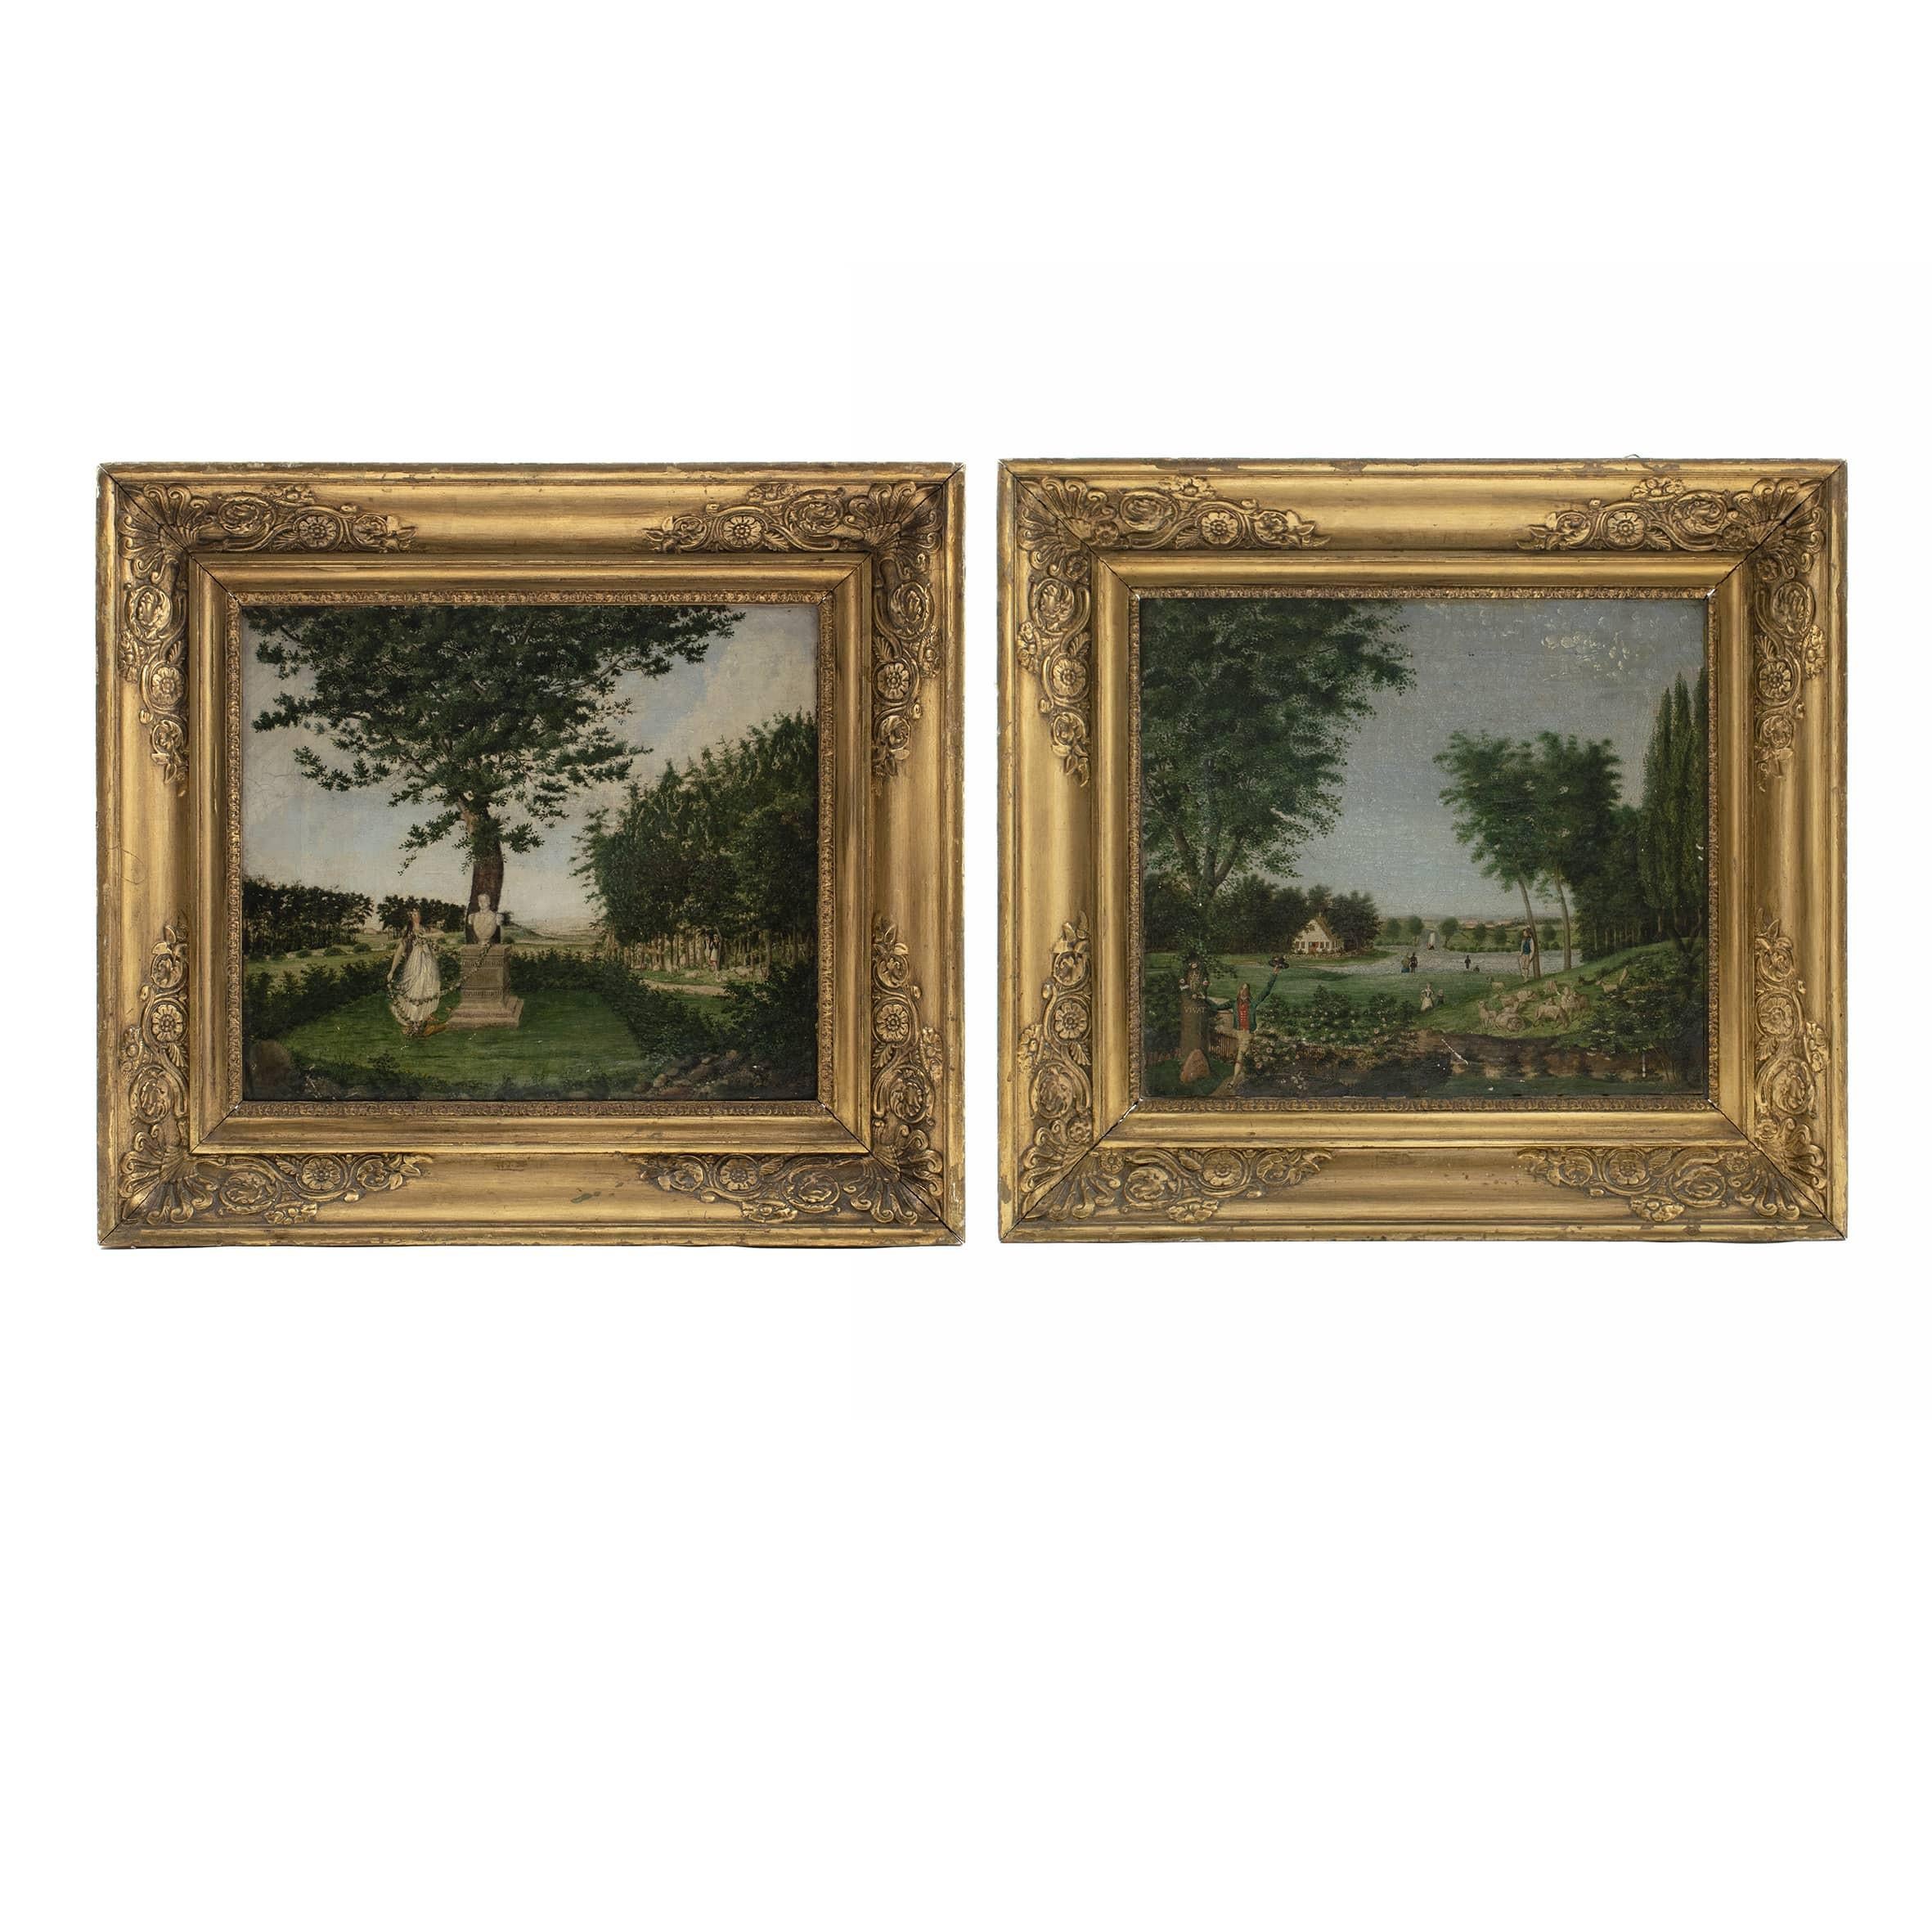 Pair of naïve allegorical landscape paintings.
Oil on canvas 
Signed Lieutenant Christian Georg V. Lind, 1837 and 1838.
See text on the back.
In original gilded damgaard frames. Etiquette from here.

A pair of charming and decorative